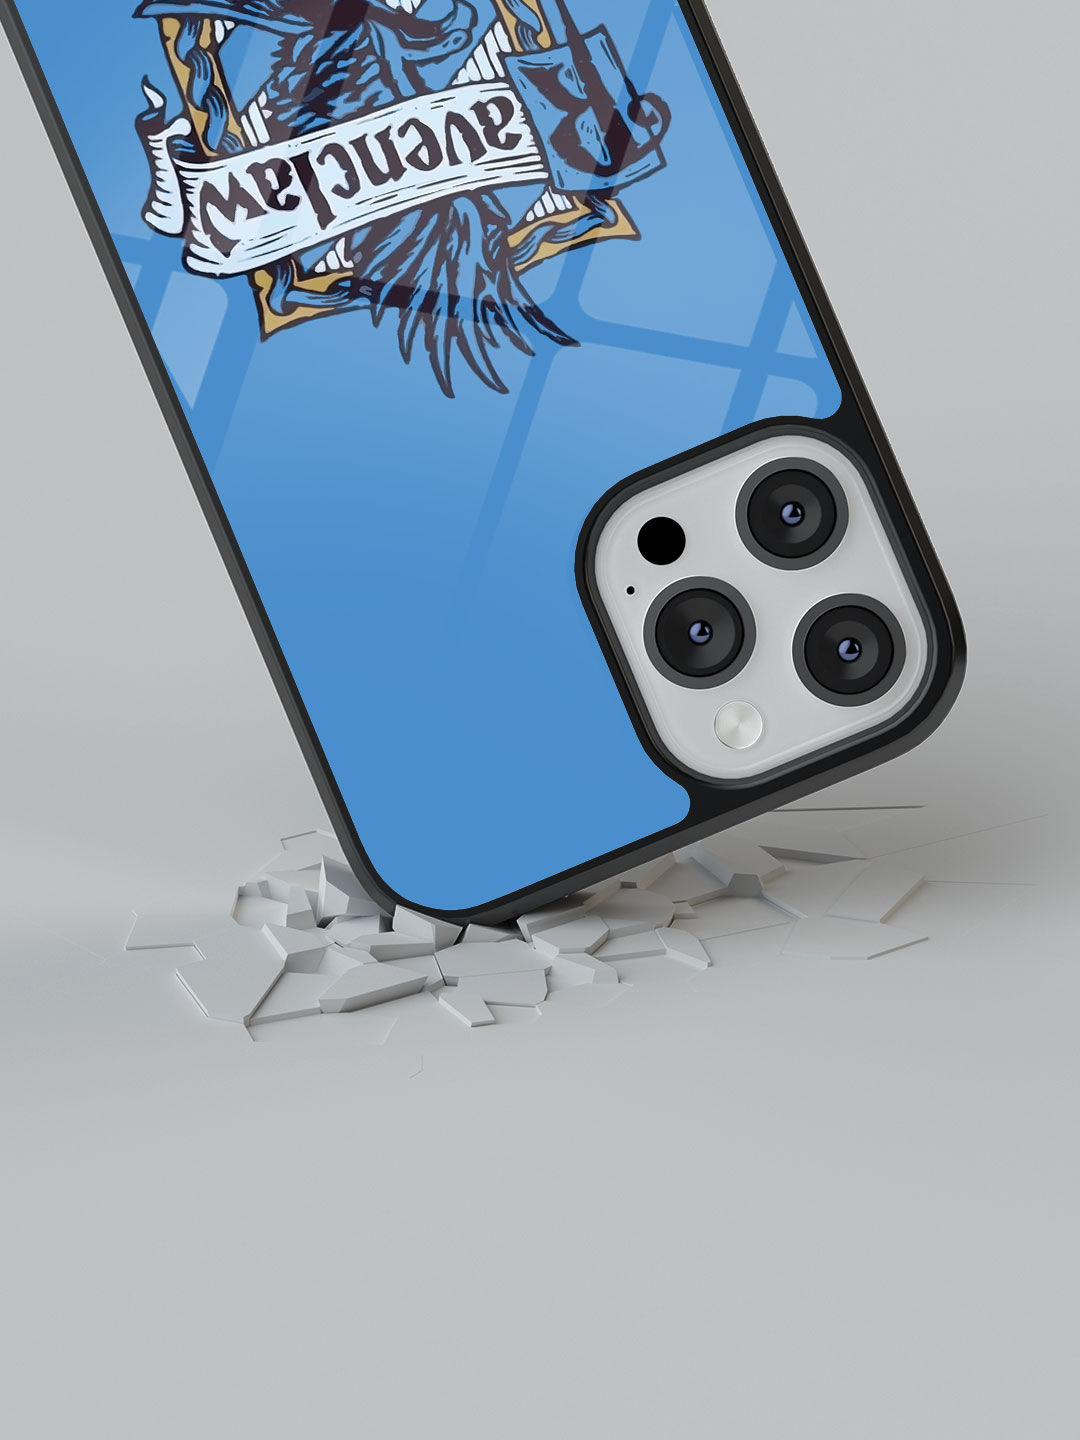 Crest Ravenclaw - Glass Case For iPhone 13 Pro Max